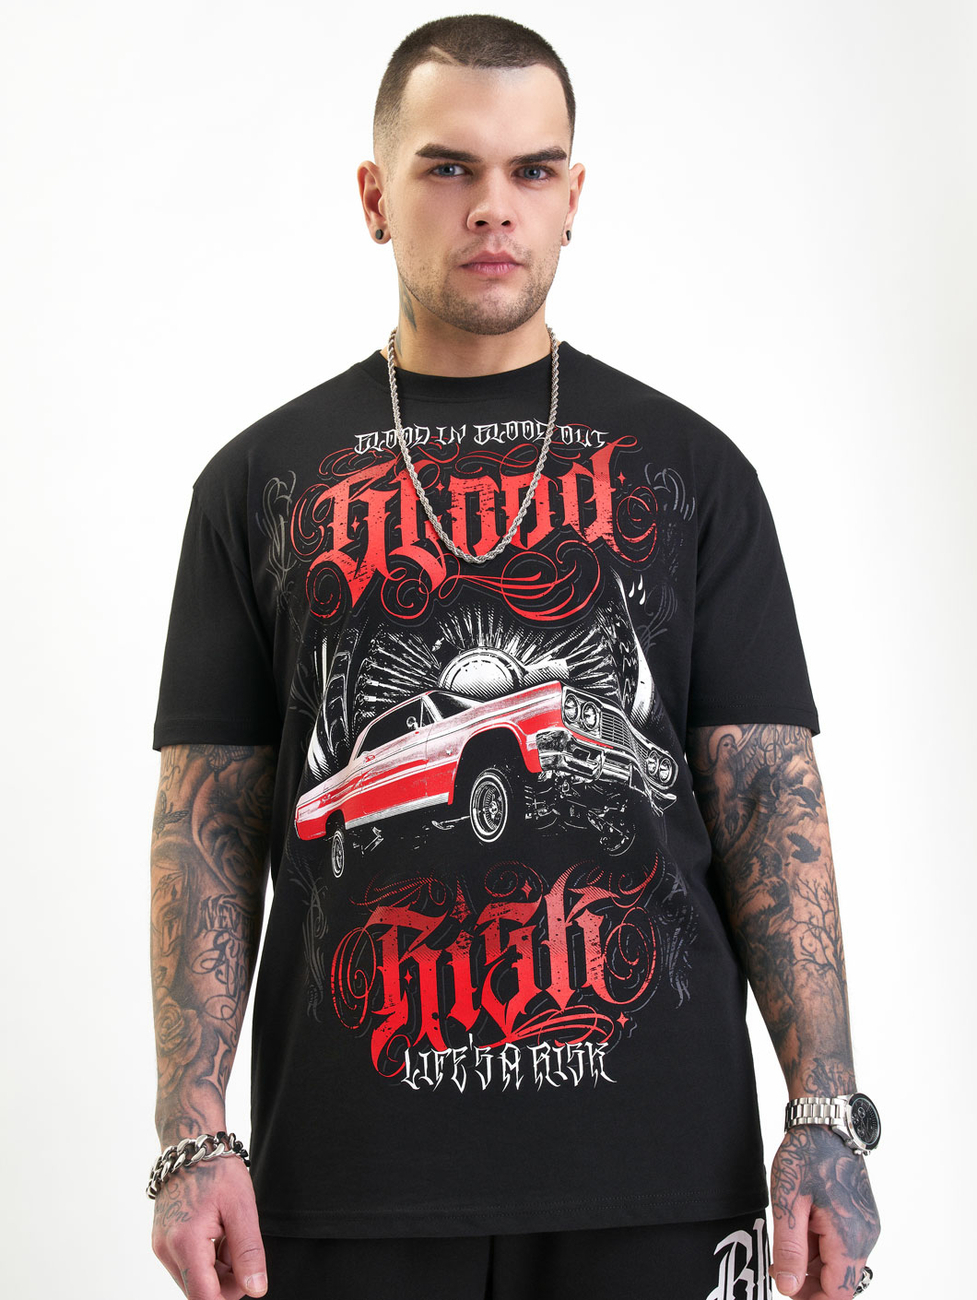 Blood In Blood Out Tavos T-Shirt 2XL